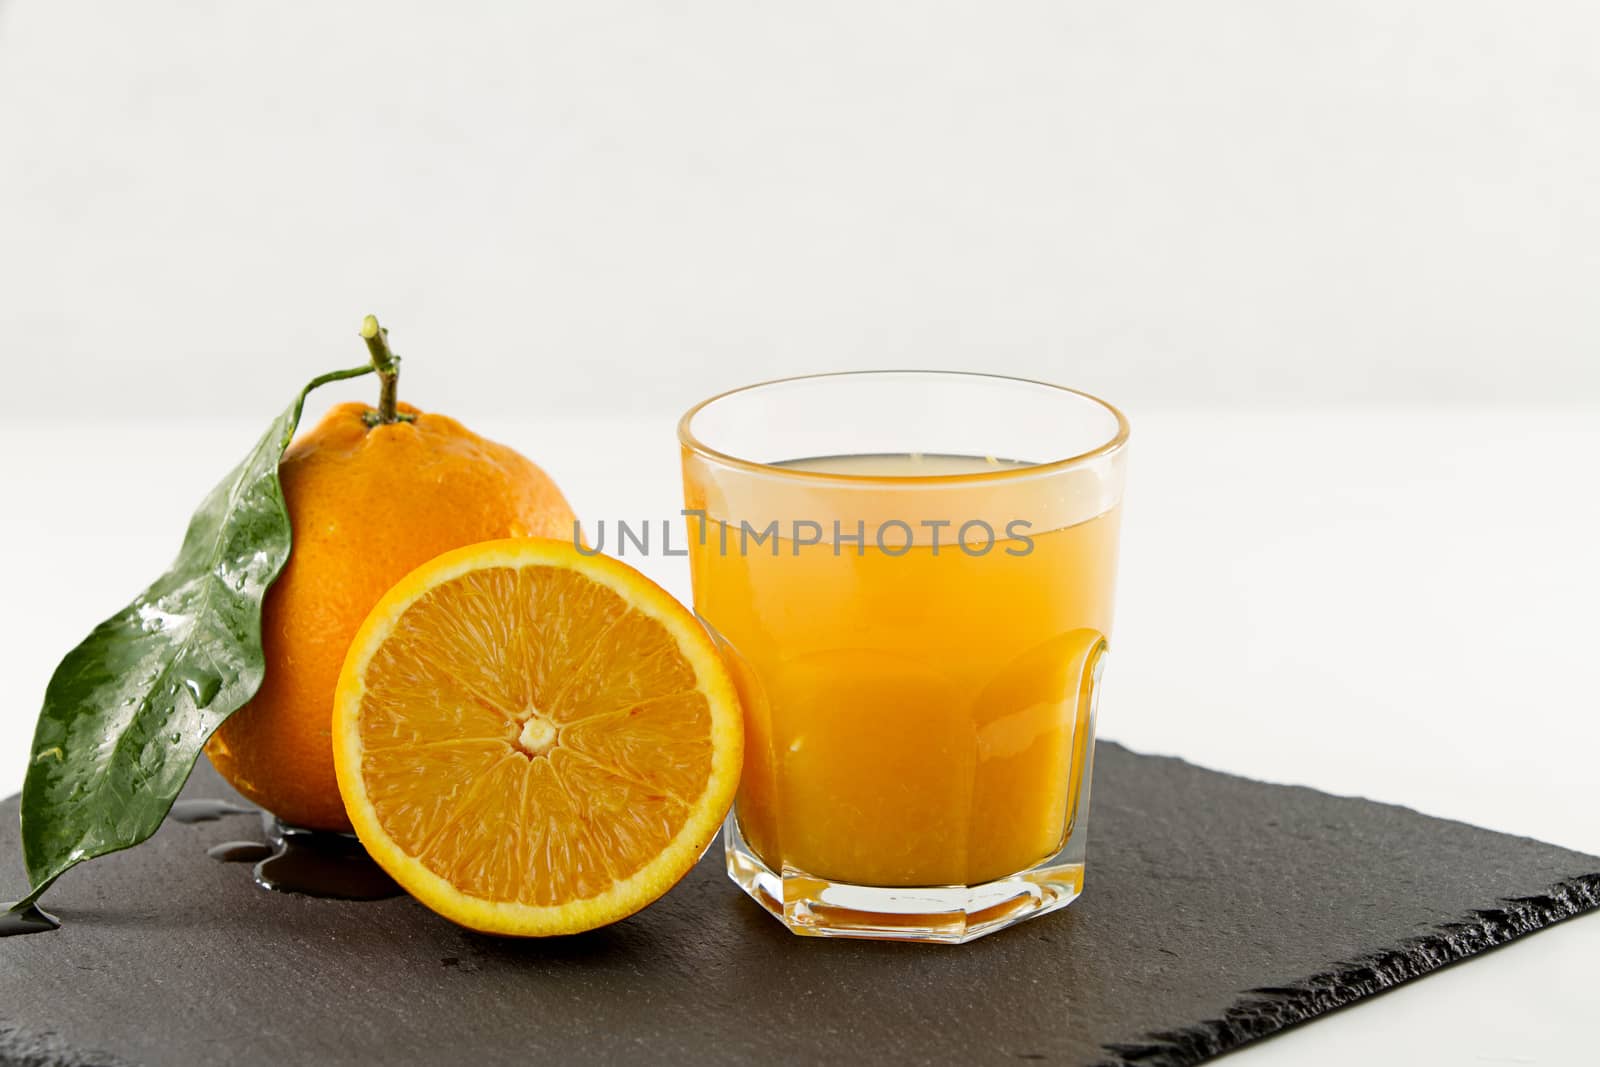 An inviting glass full of orange juice, a half orange and a whole one with leaf on a square slate plate onwhite background